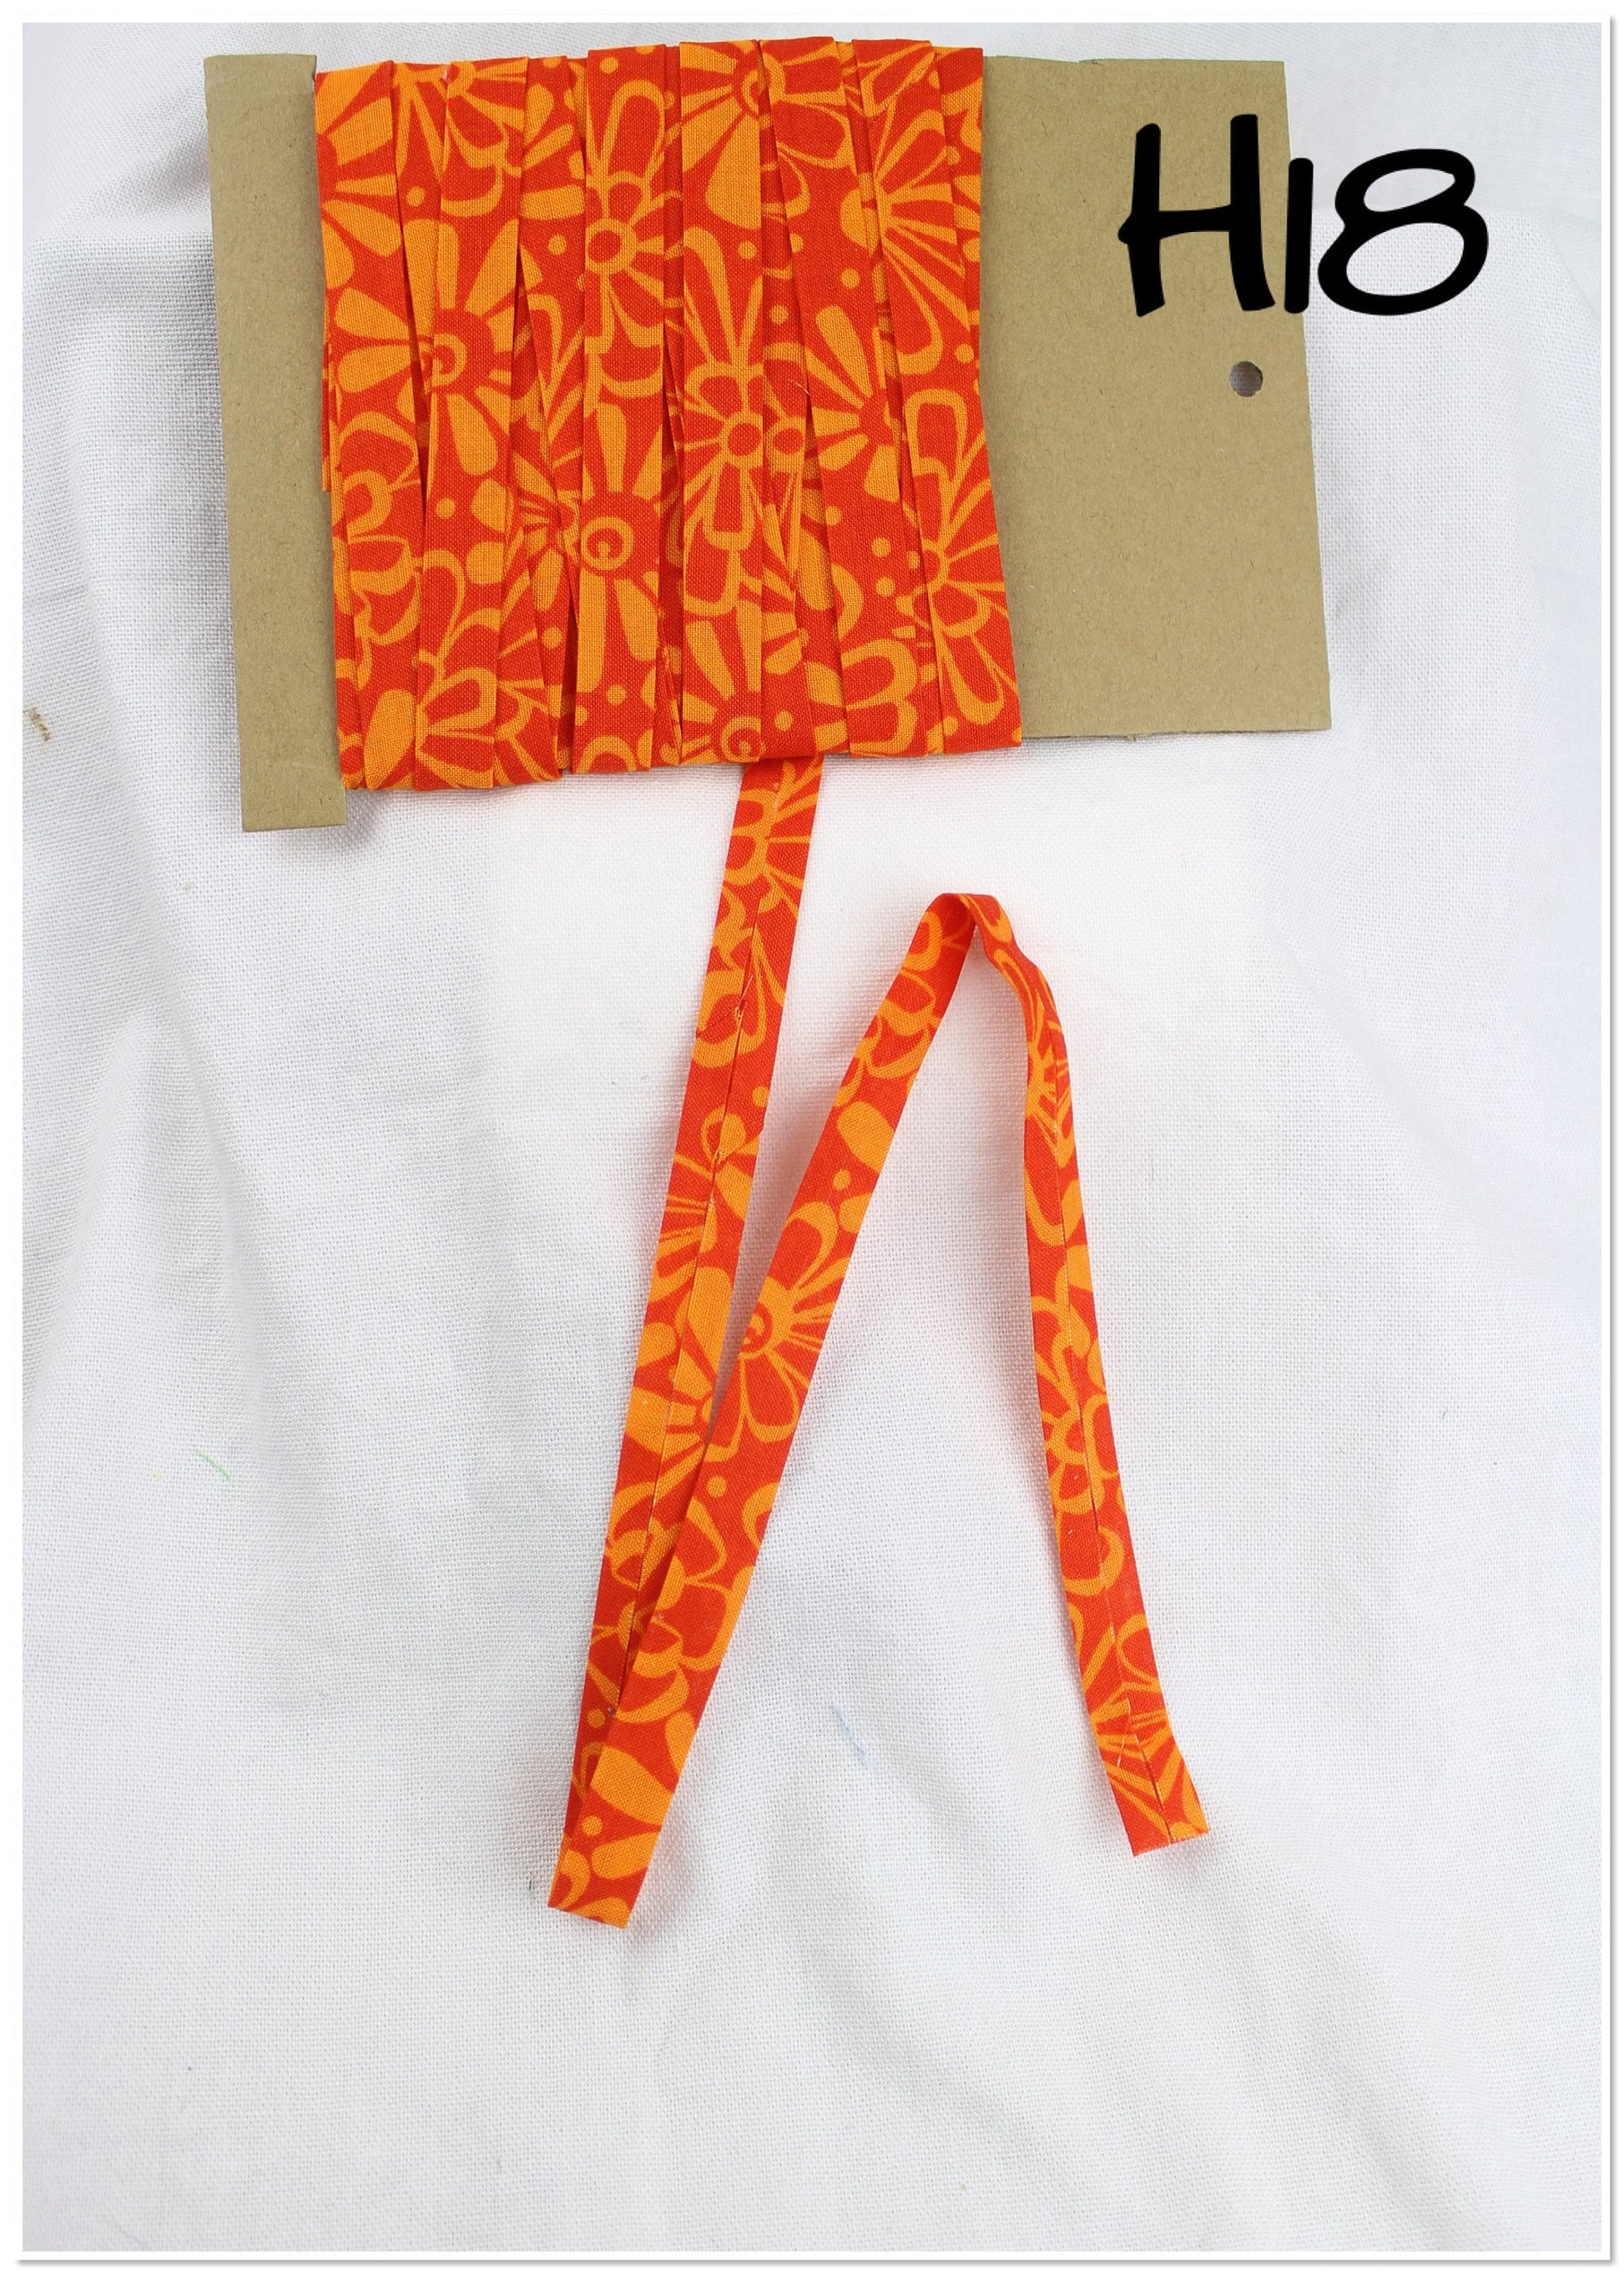 Bias Binding (Tape) 12mm, Cotton, Single Fold, tangerine dream and maui. Fusible iron on available.